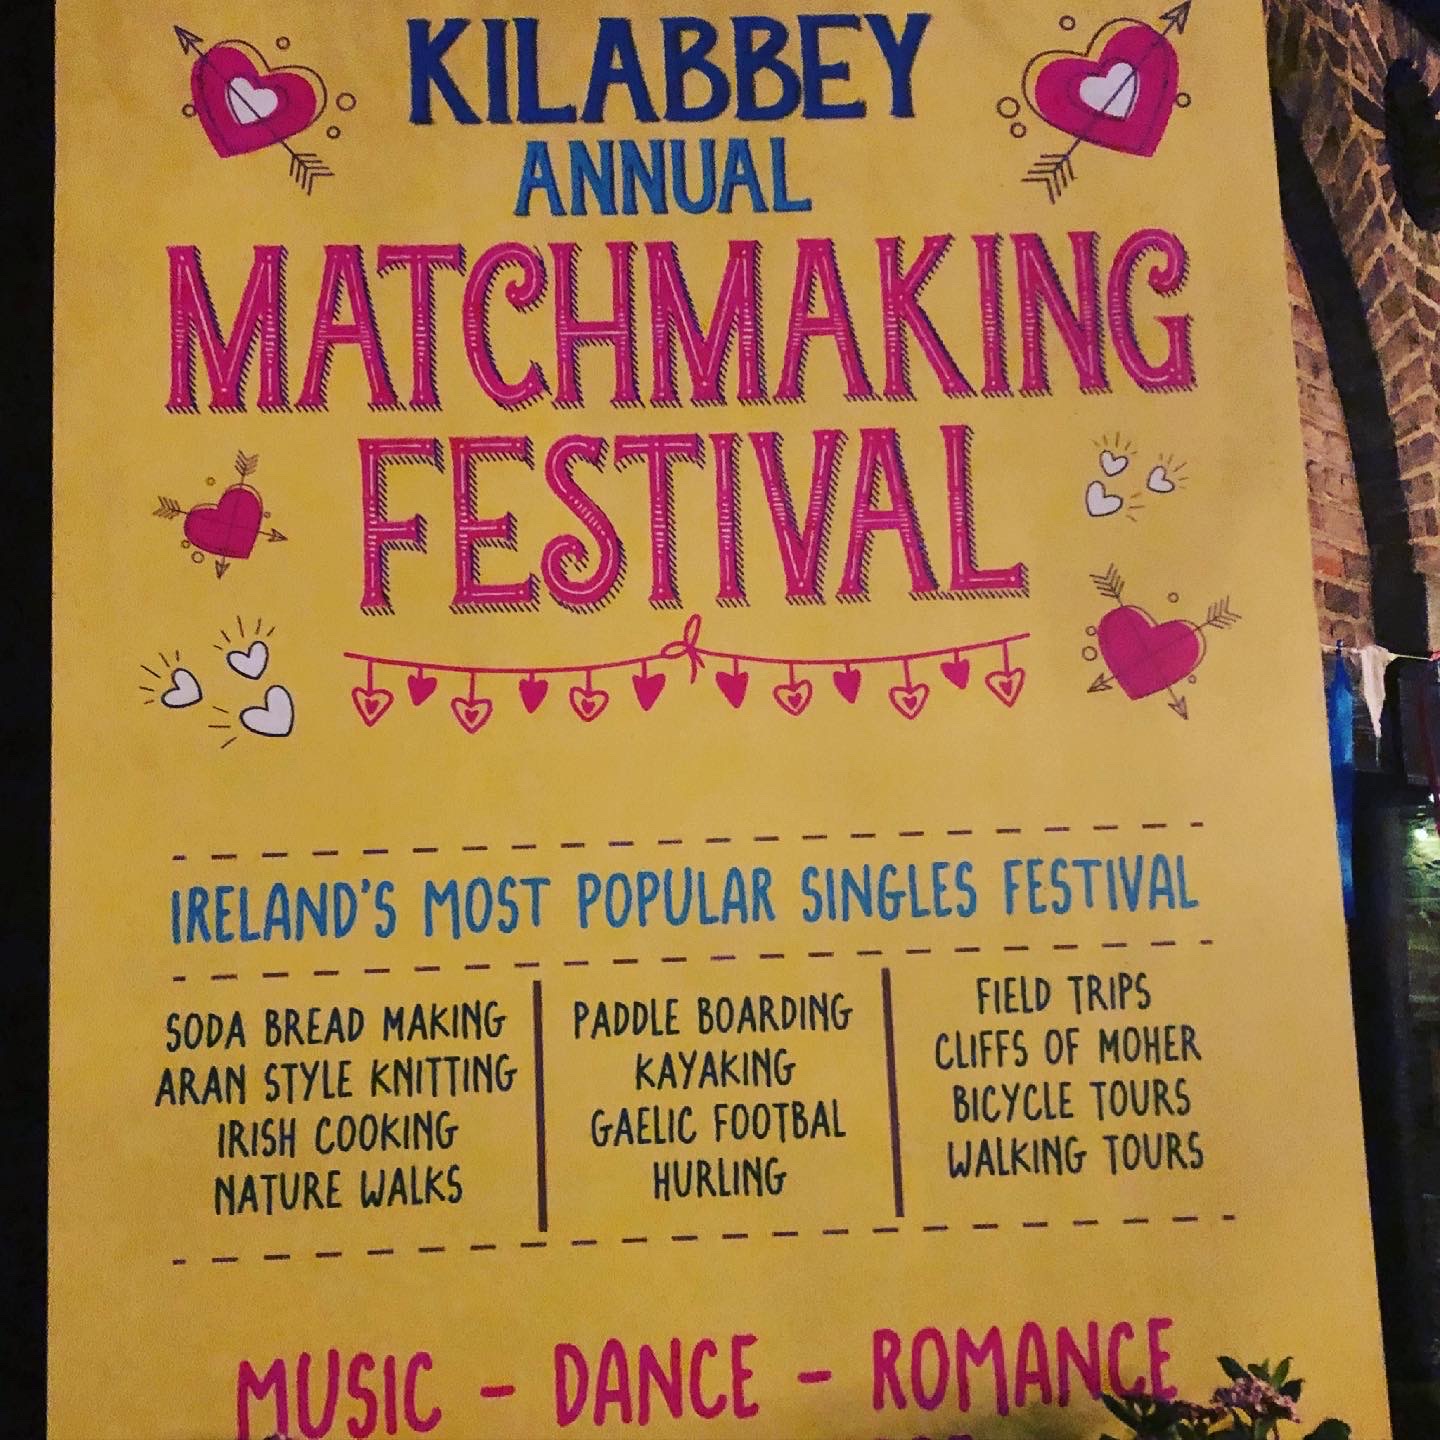 Is kilabbey a real place in ireland?